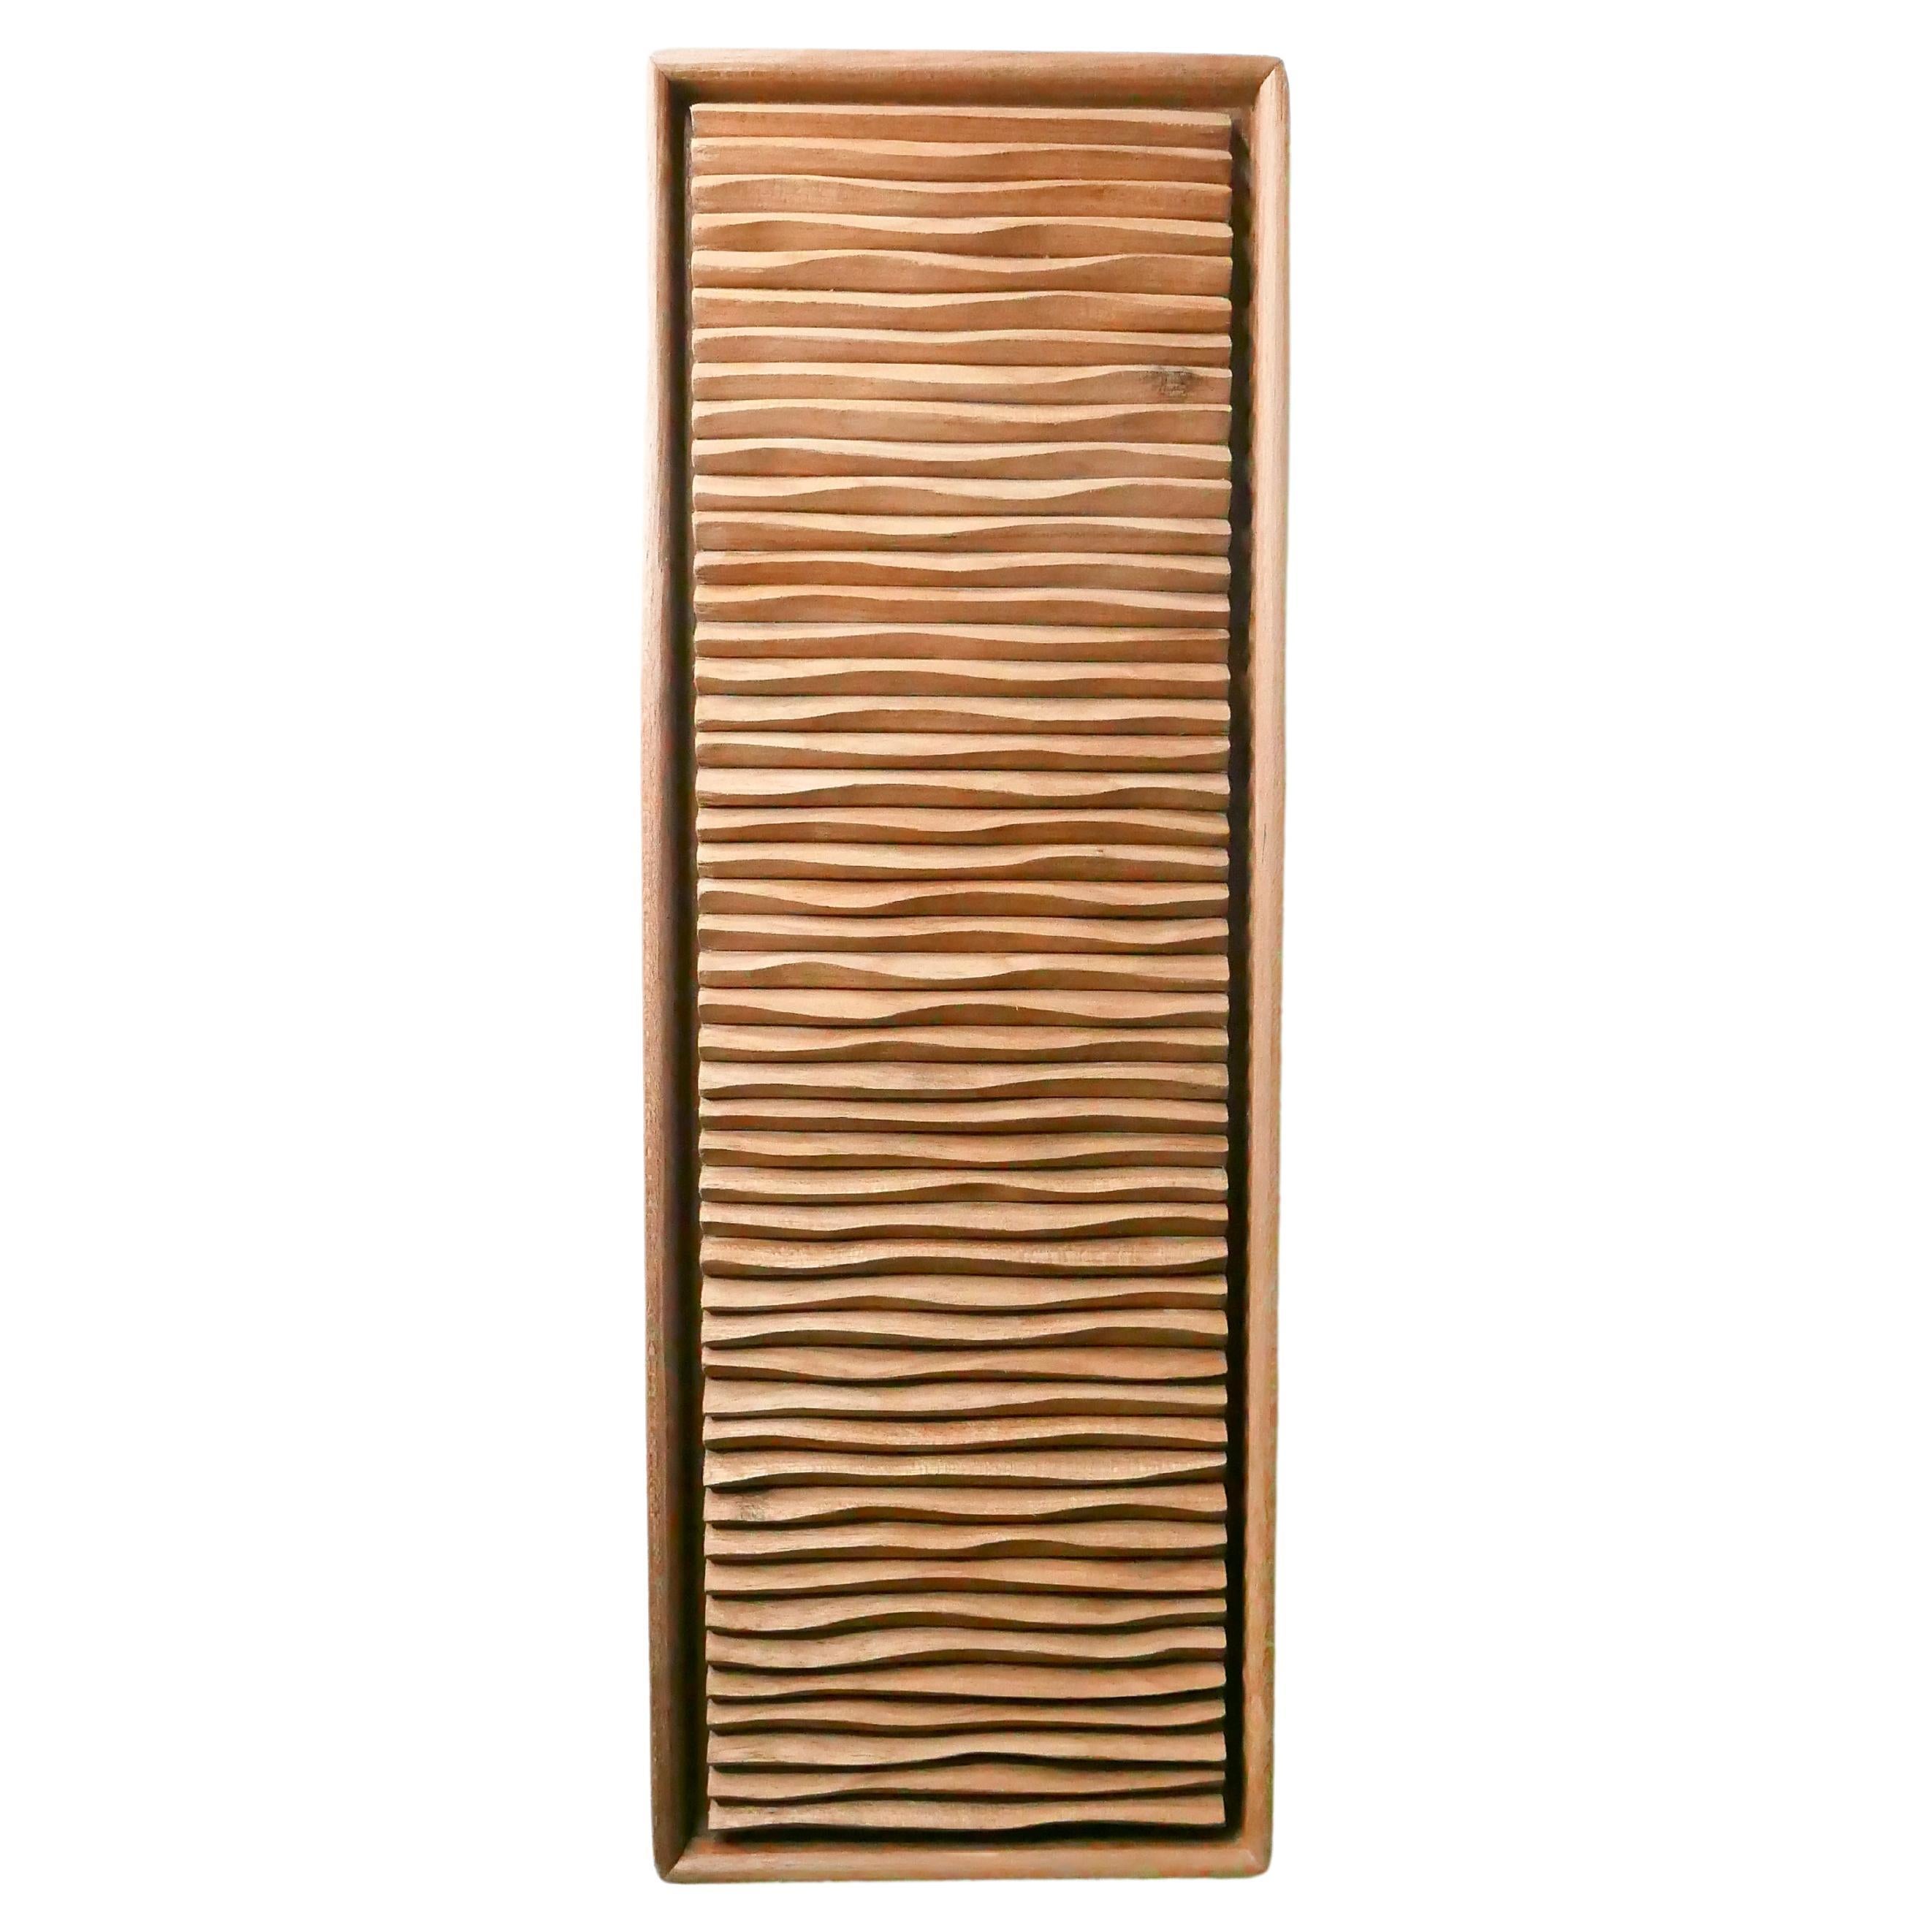 Contemporary Wall Mounted Sculpture from 'Ripples' Series by James Rowland 